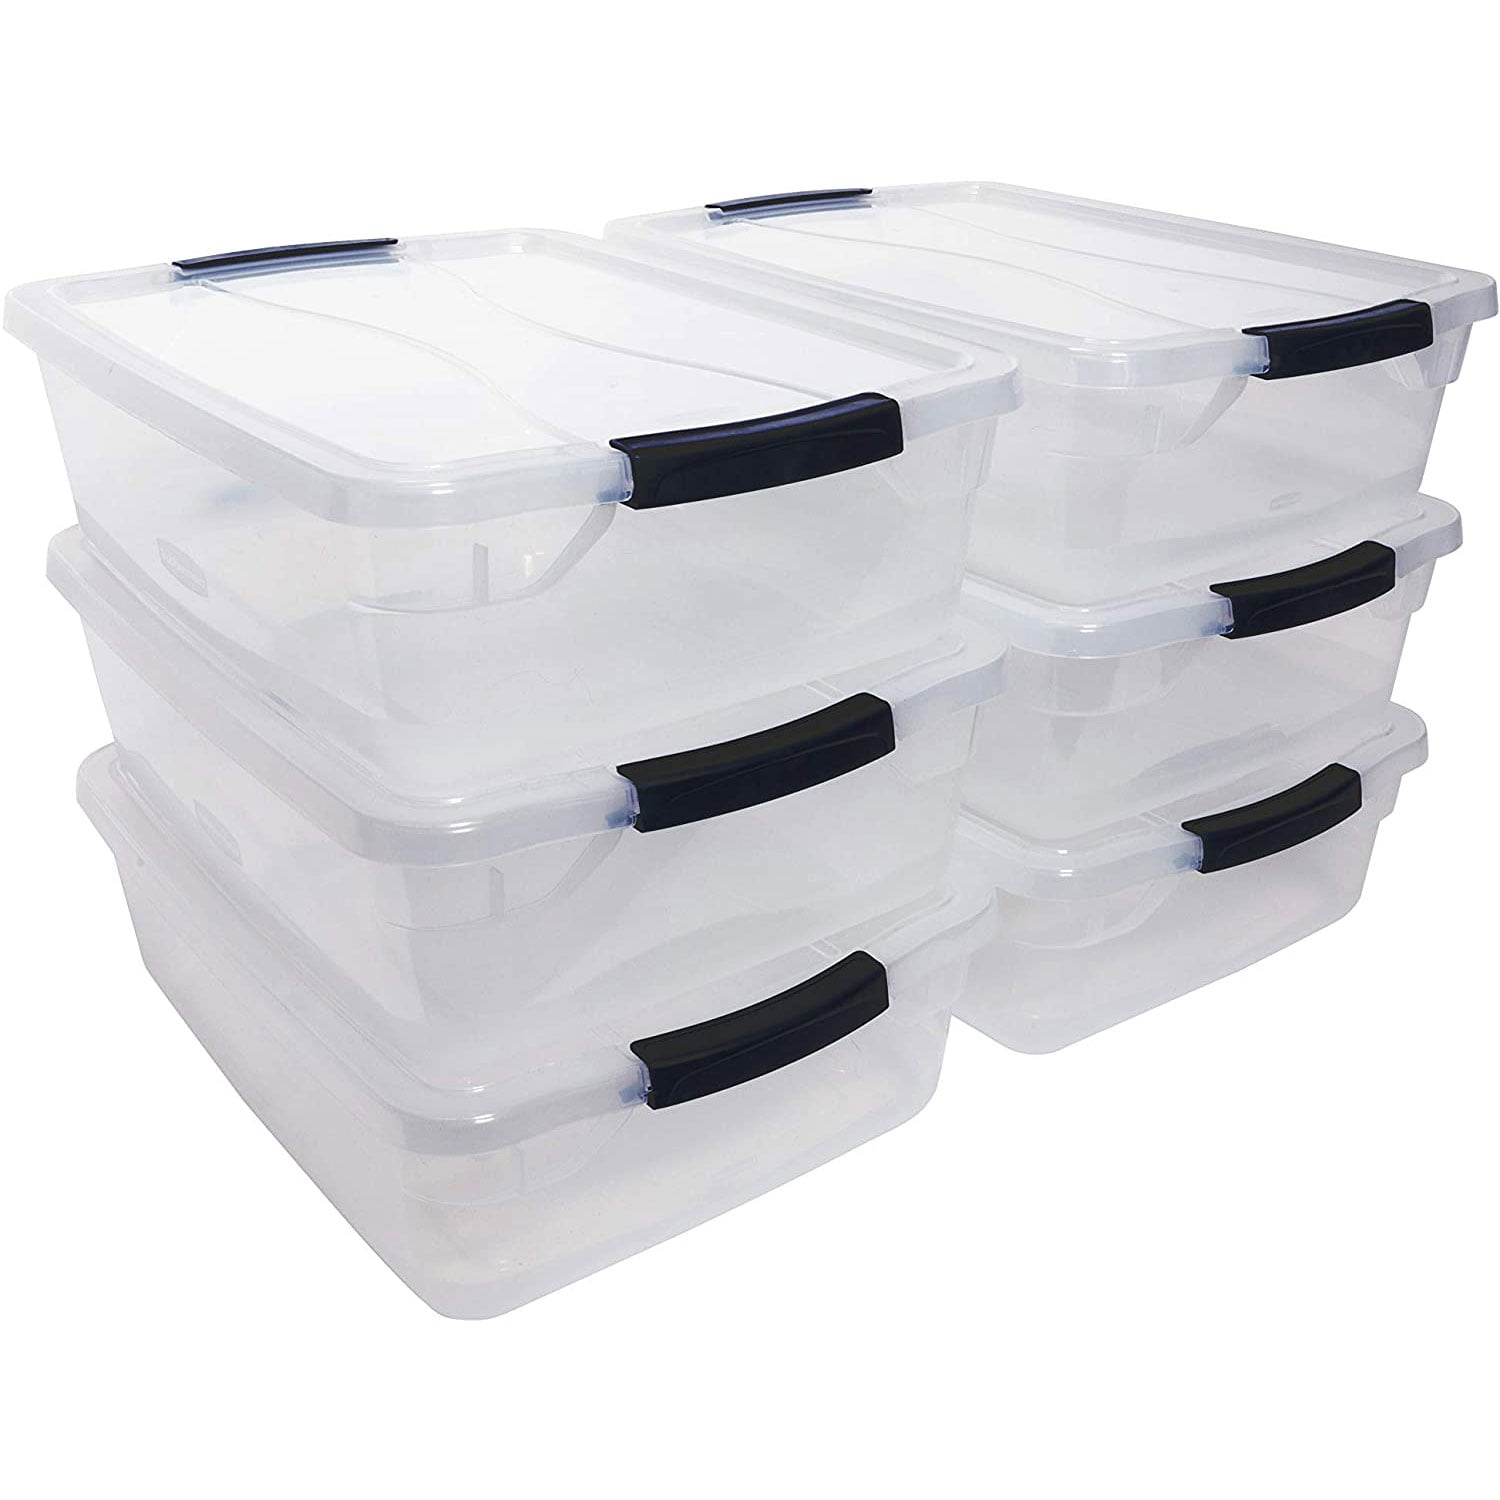 Quality Plastic Storage Boxes Clear Box With Lids Home Office Kitchen Stackable 